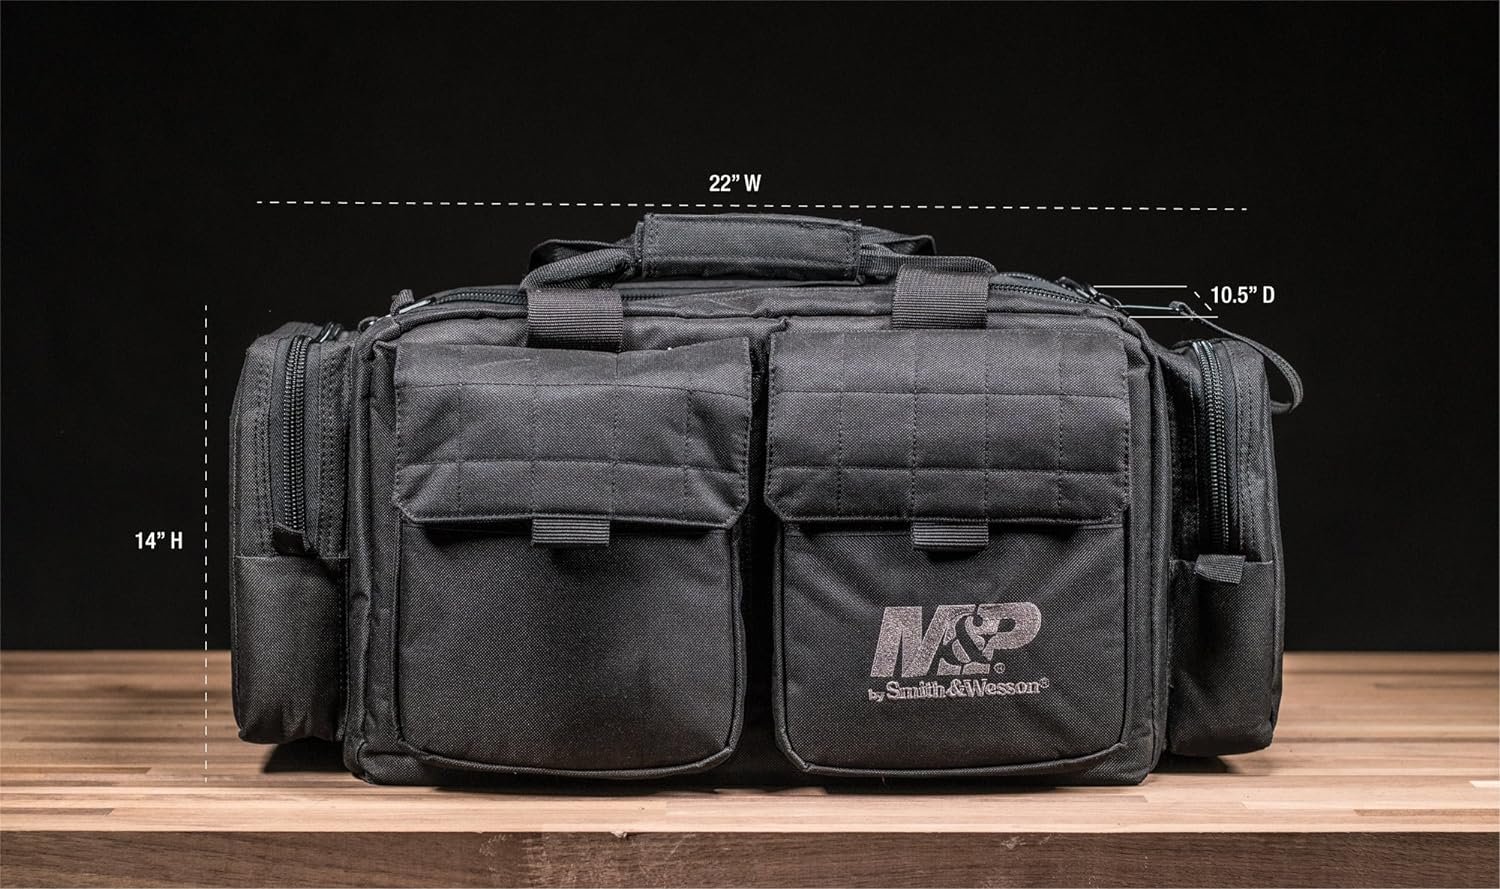 Smith & Wesson S&W and M&P Tactical Range Bags Review